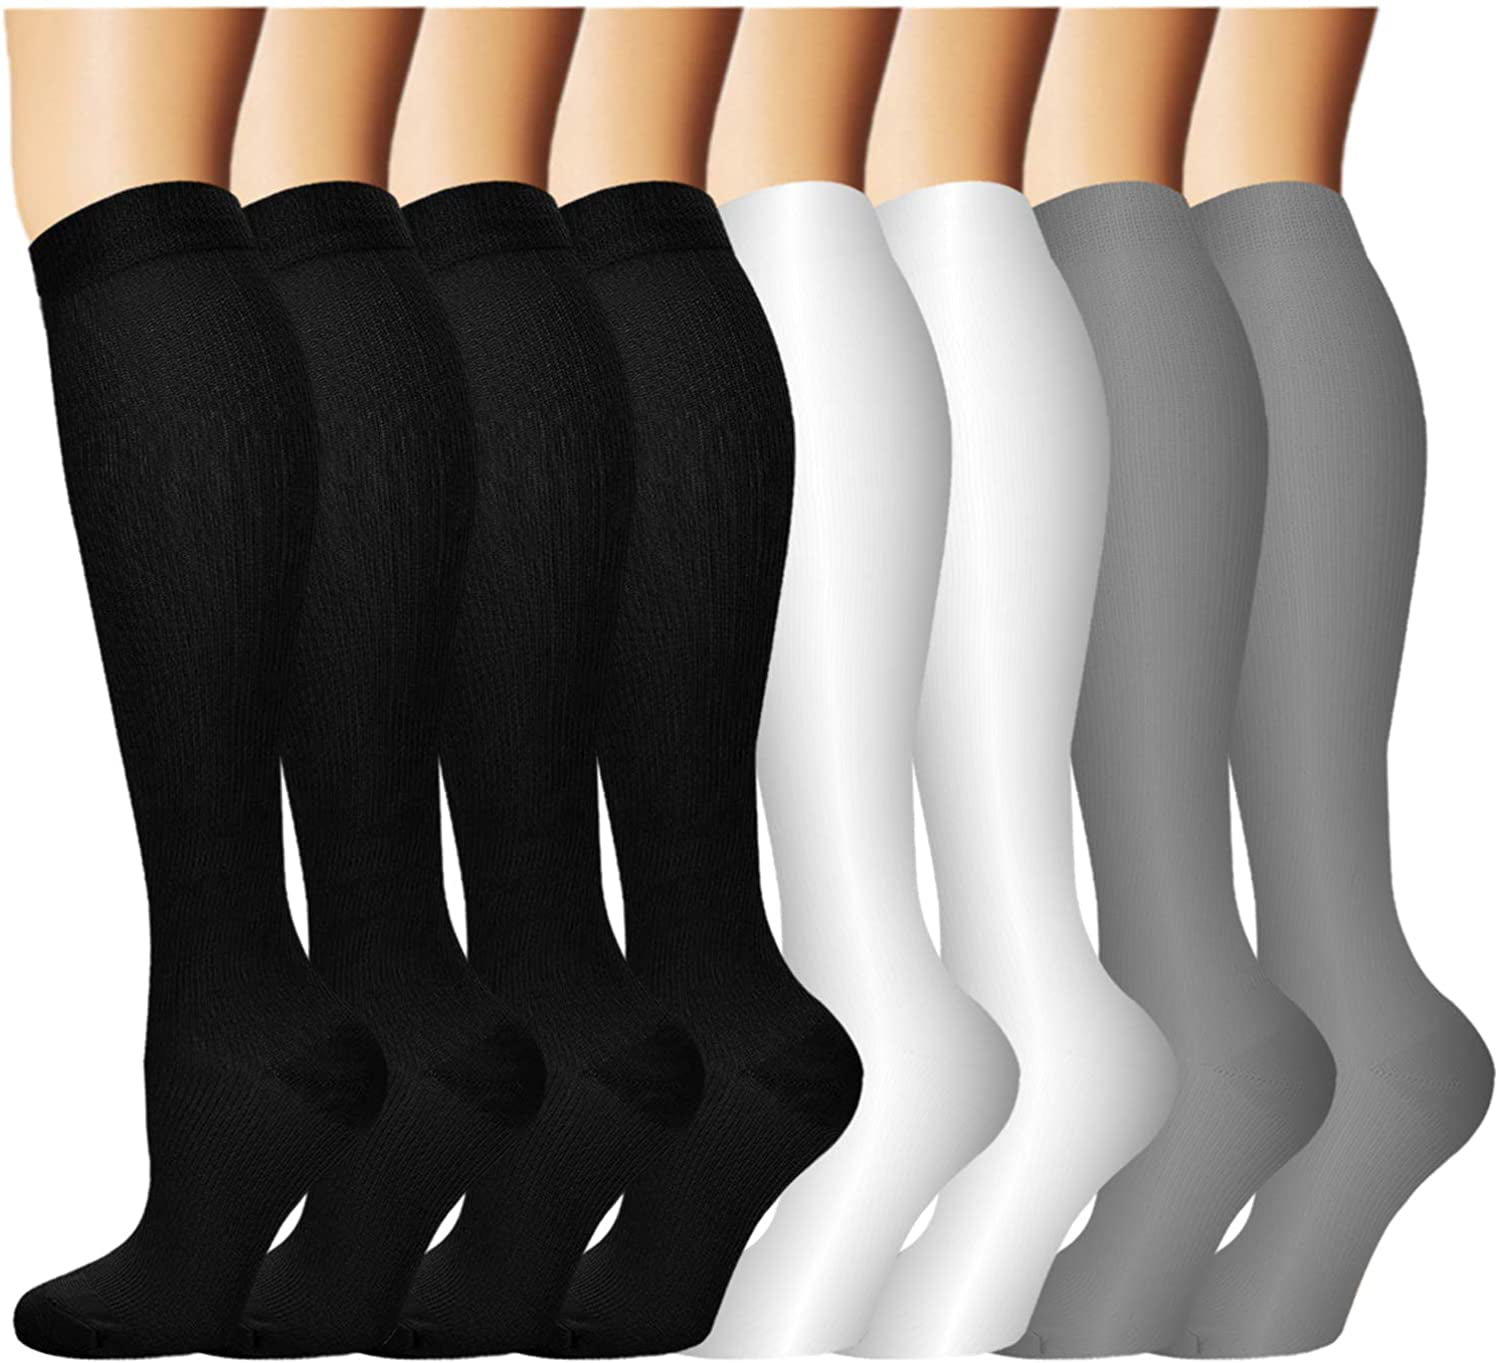 Copper Compression Socks For Men & Women Circulation-Best For Medical Running Hiking Cycling 15-20 mmHg 